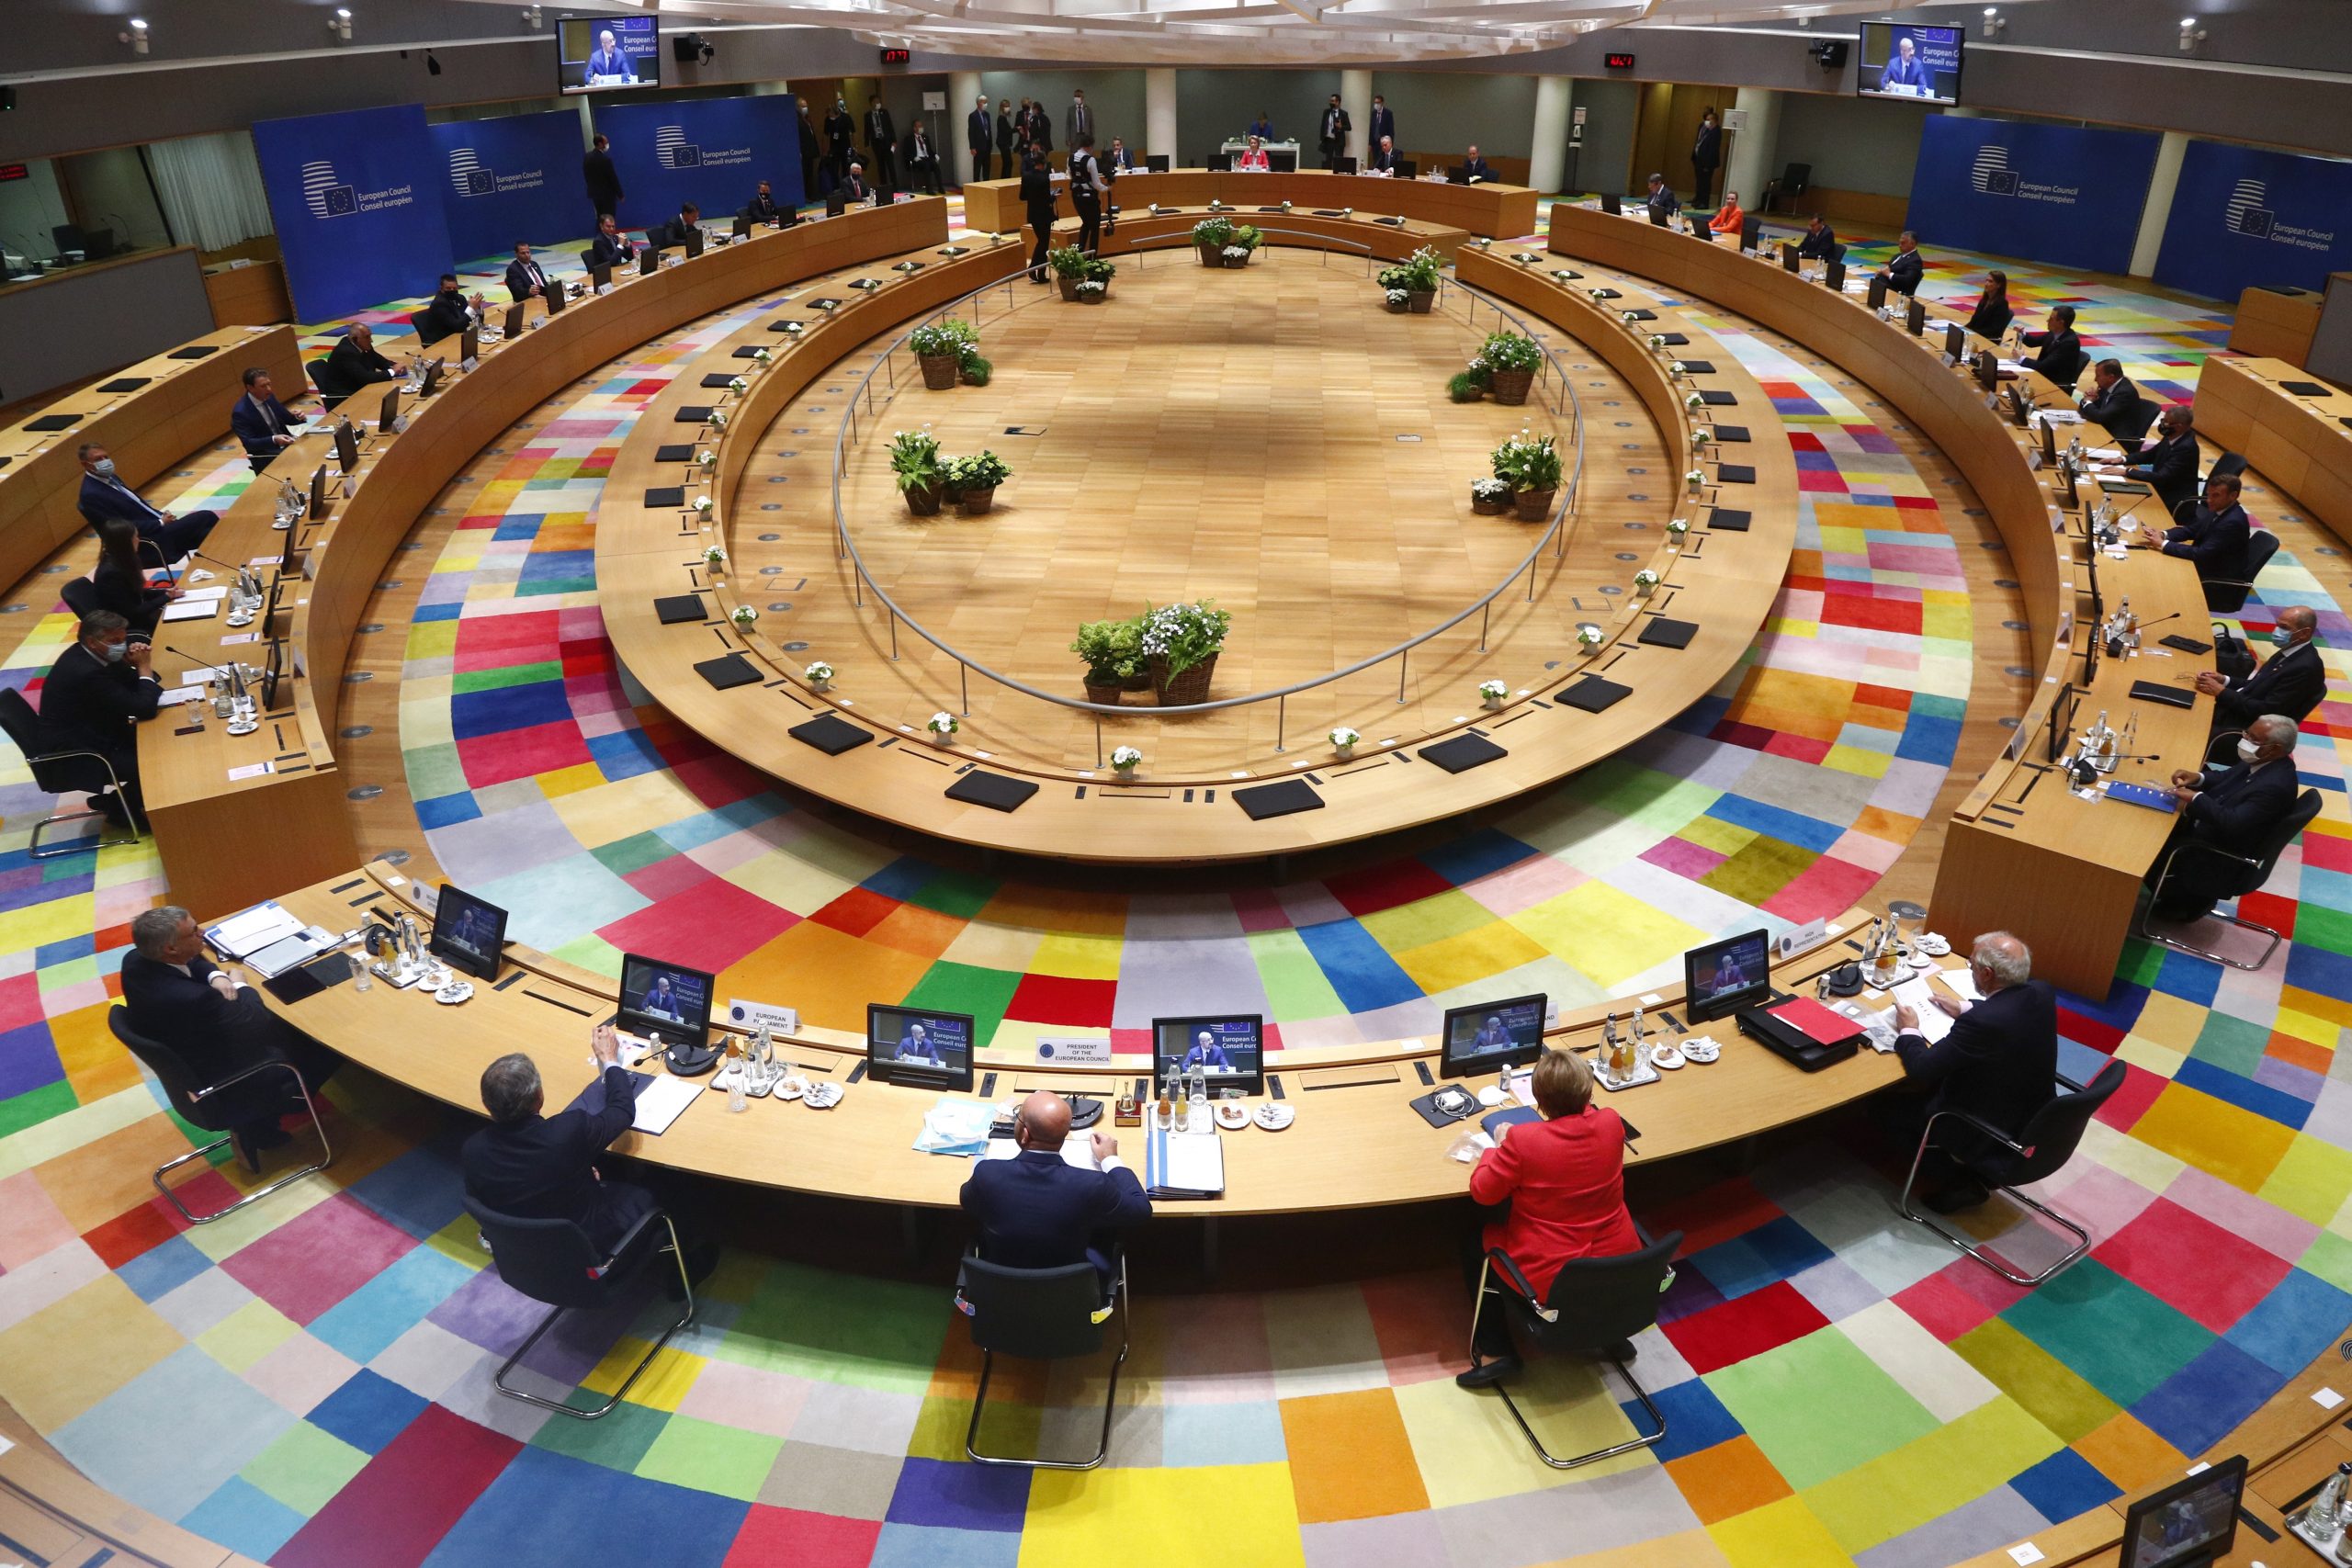 epa08551448 A general view show European Union leader taking part in an EU summit at the European Council building in Brussels, Belgium, 17 July 2020. European Union nations leaders meet face-to-face for the first time since February to discuss plans responding to coronavirus crisis and new long-term EU budget at the special European Council on 17 and 18 July.  EPA/FRANCOIS LENOIR / POOL